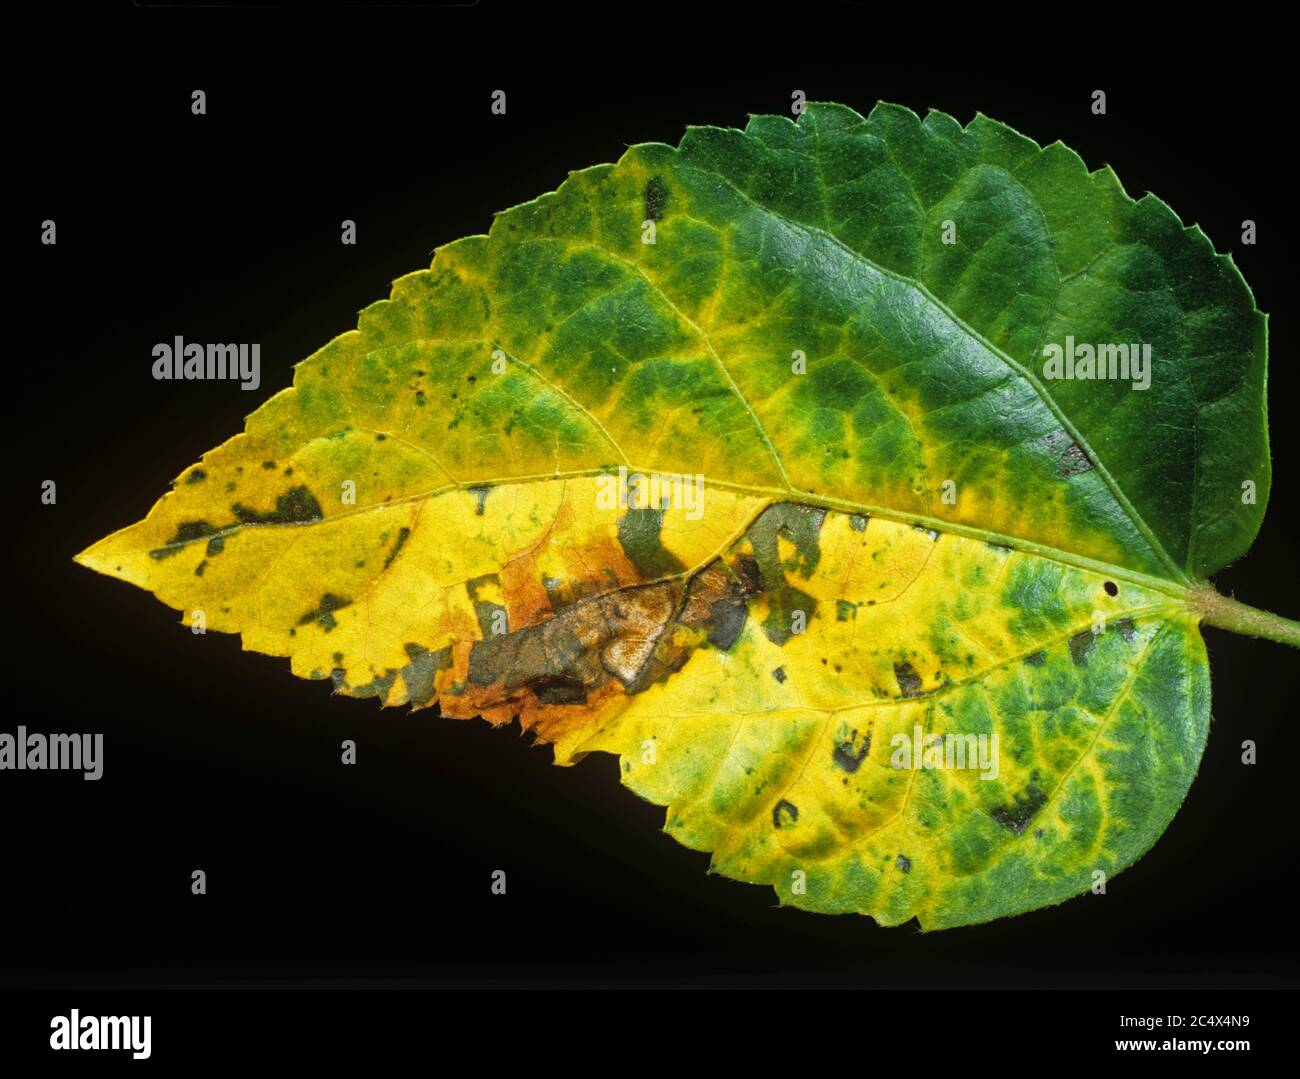 Angular leaf spot (Xanthomonas  axonopodis pv. malvacearum) necrotic lesions and chloriosis on a Hisbiscus leaf, Florida, USA Stock Photo